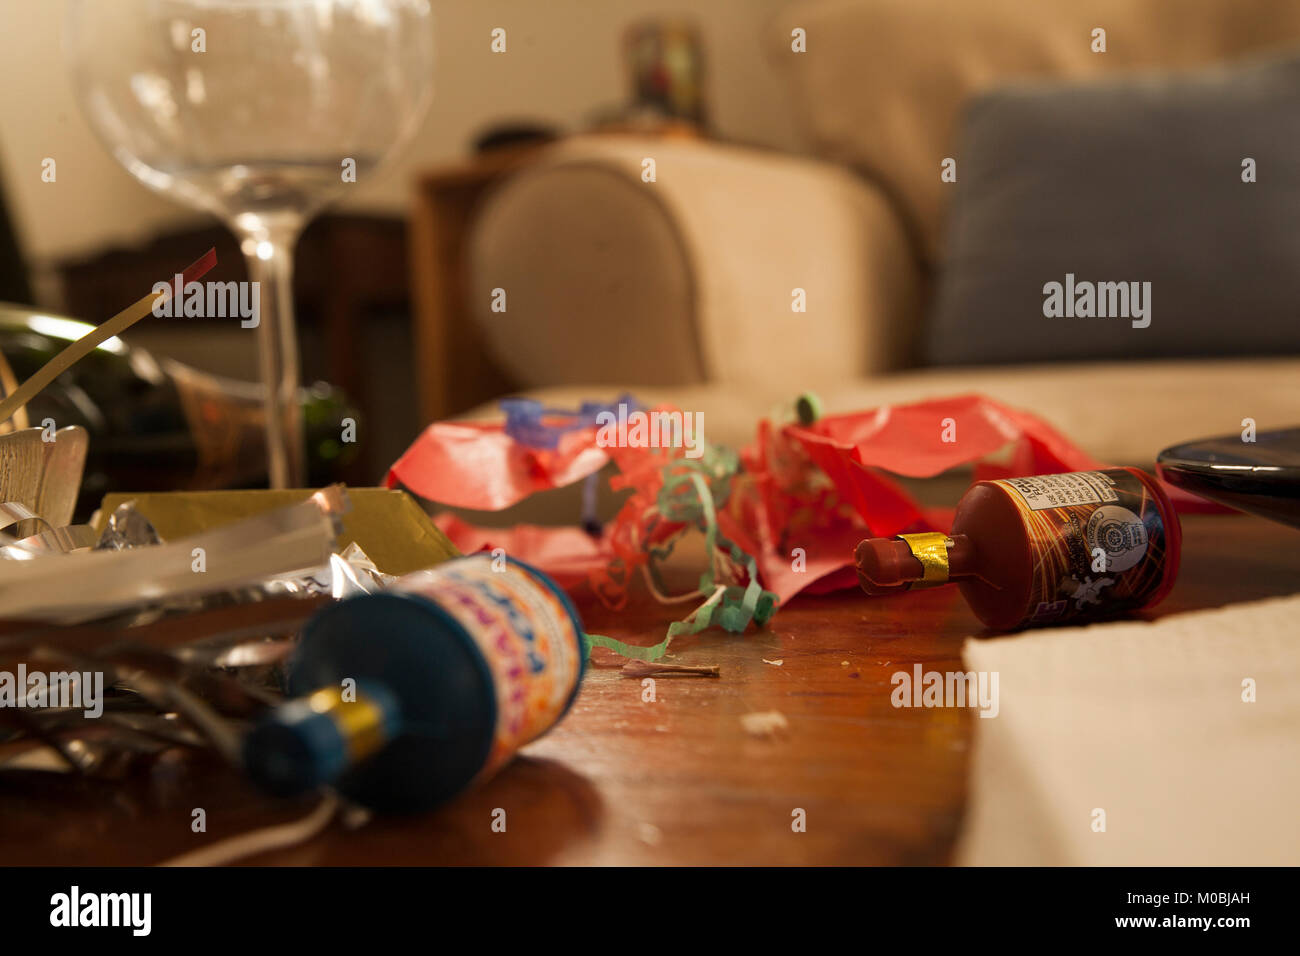 The aftermath of a New Year's celebration Stock Photo